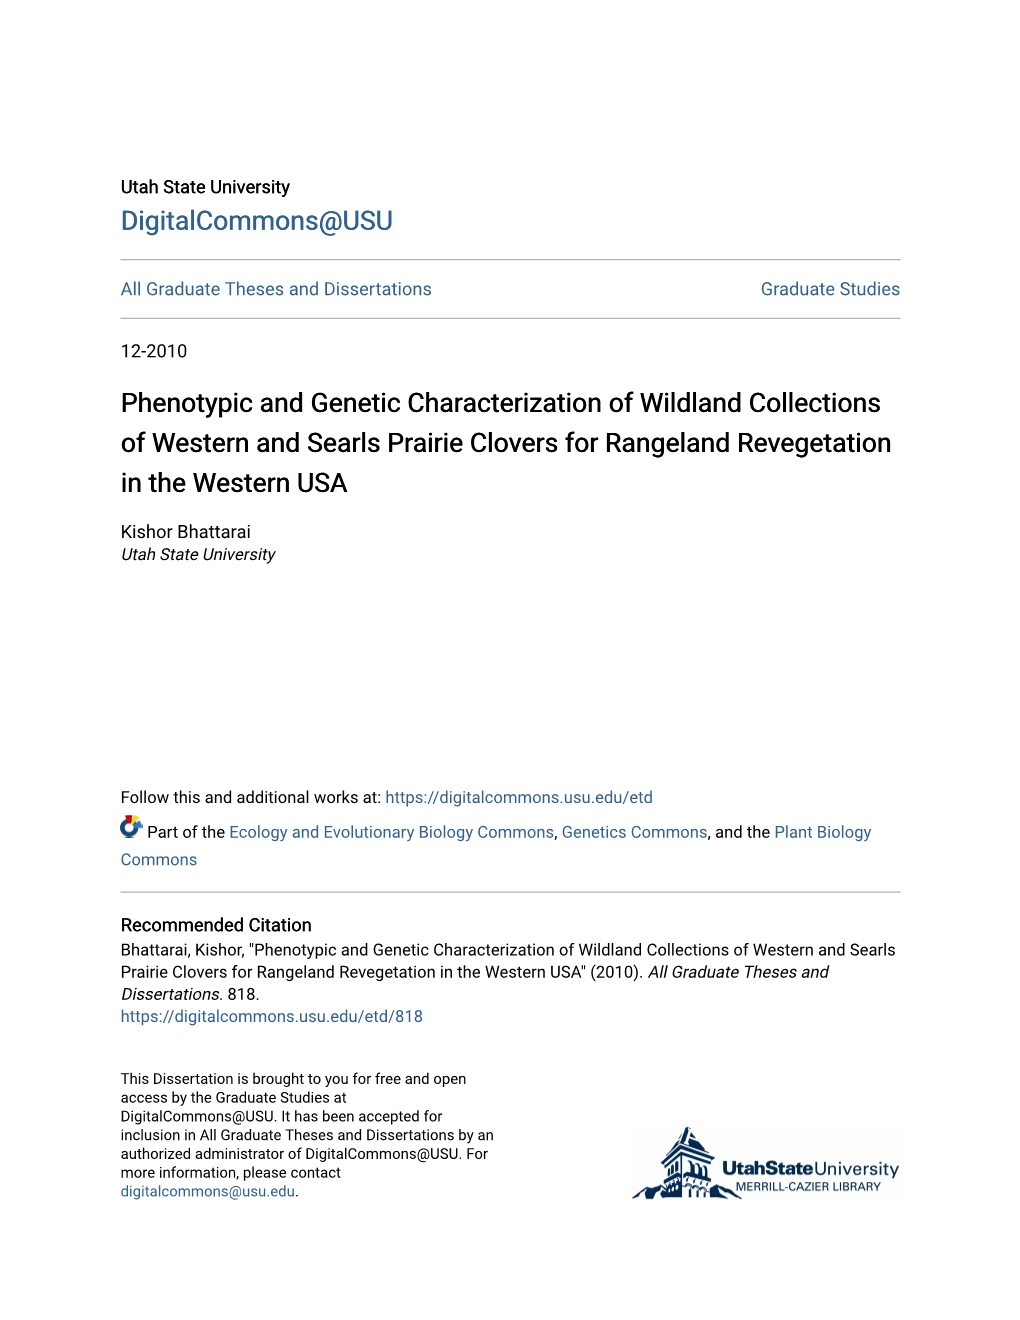 Phenotypic and Genetic Characterization of Wildland Collections of Western and Searls Prairie Clovers for Rangeland Revegetation in the Western USA